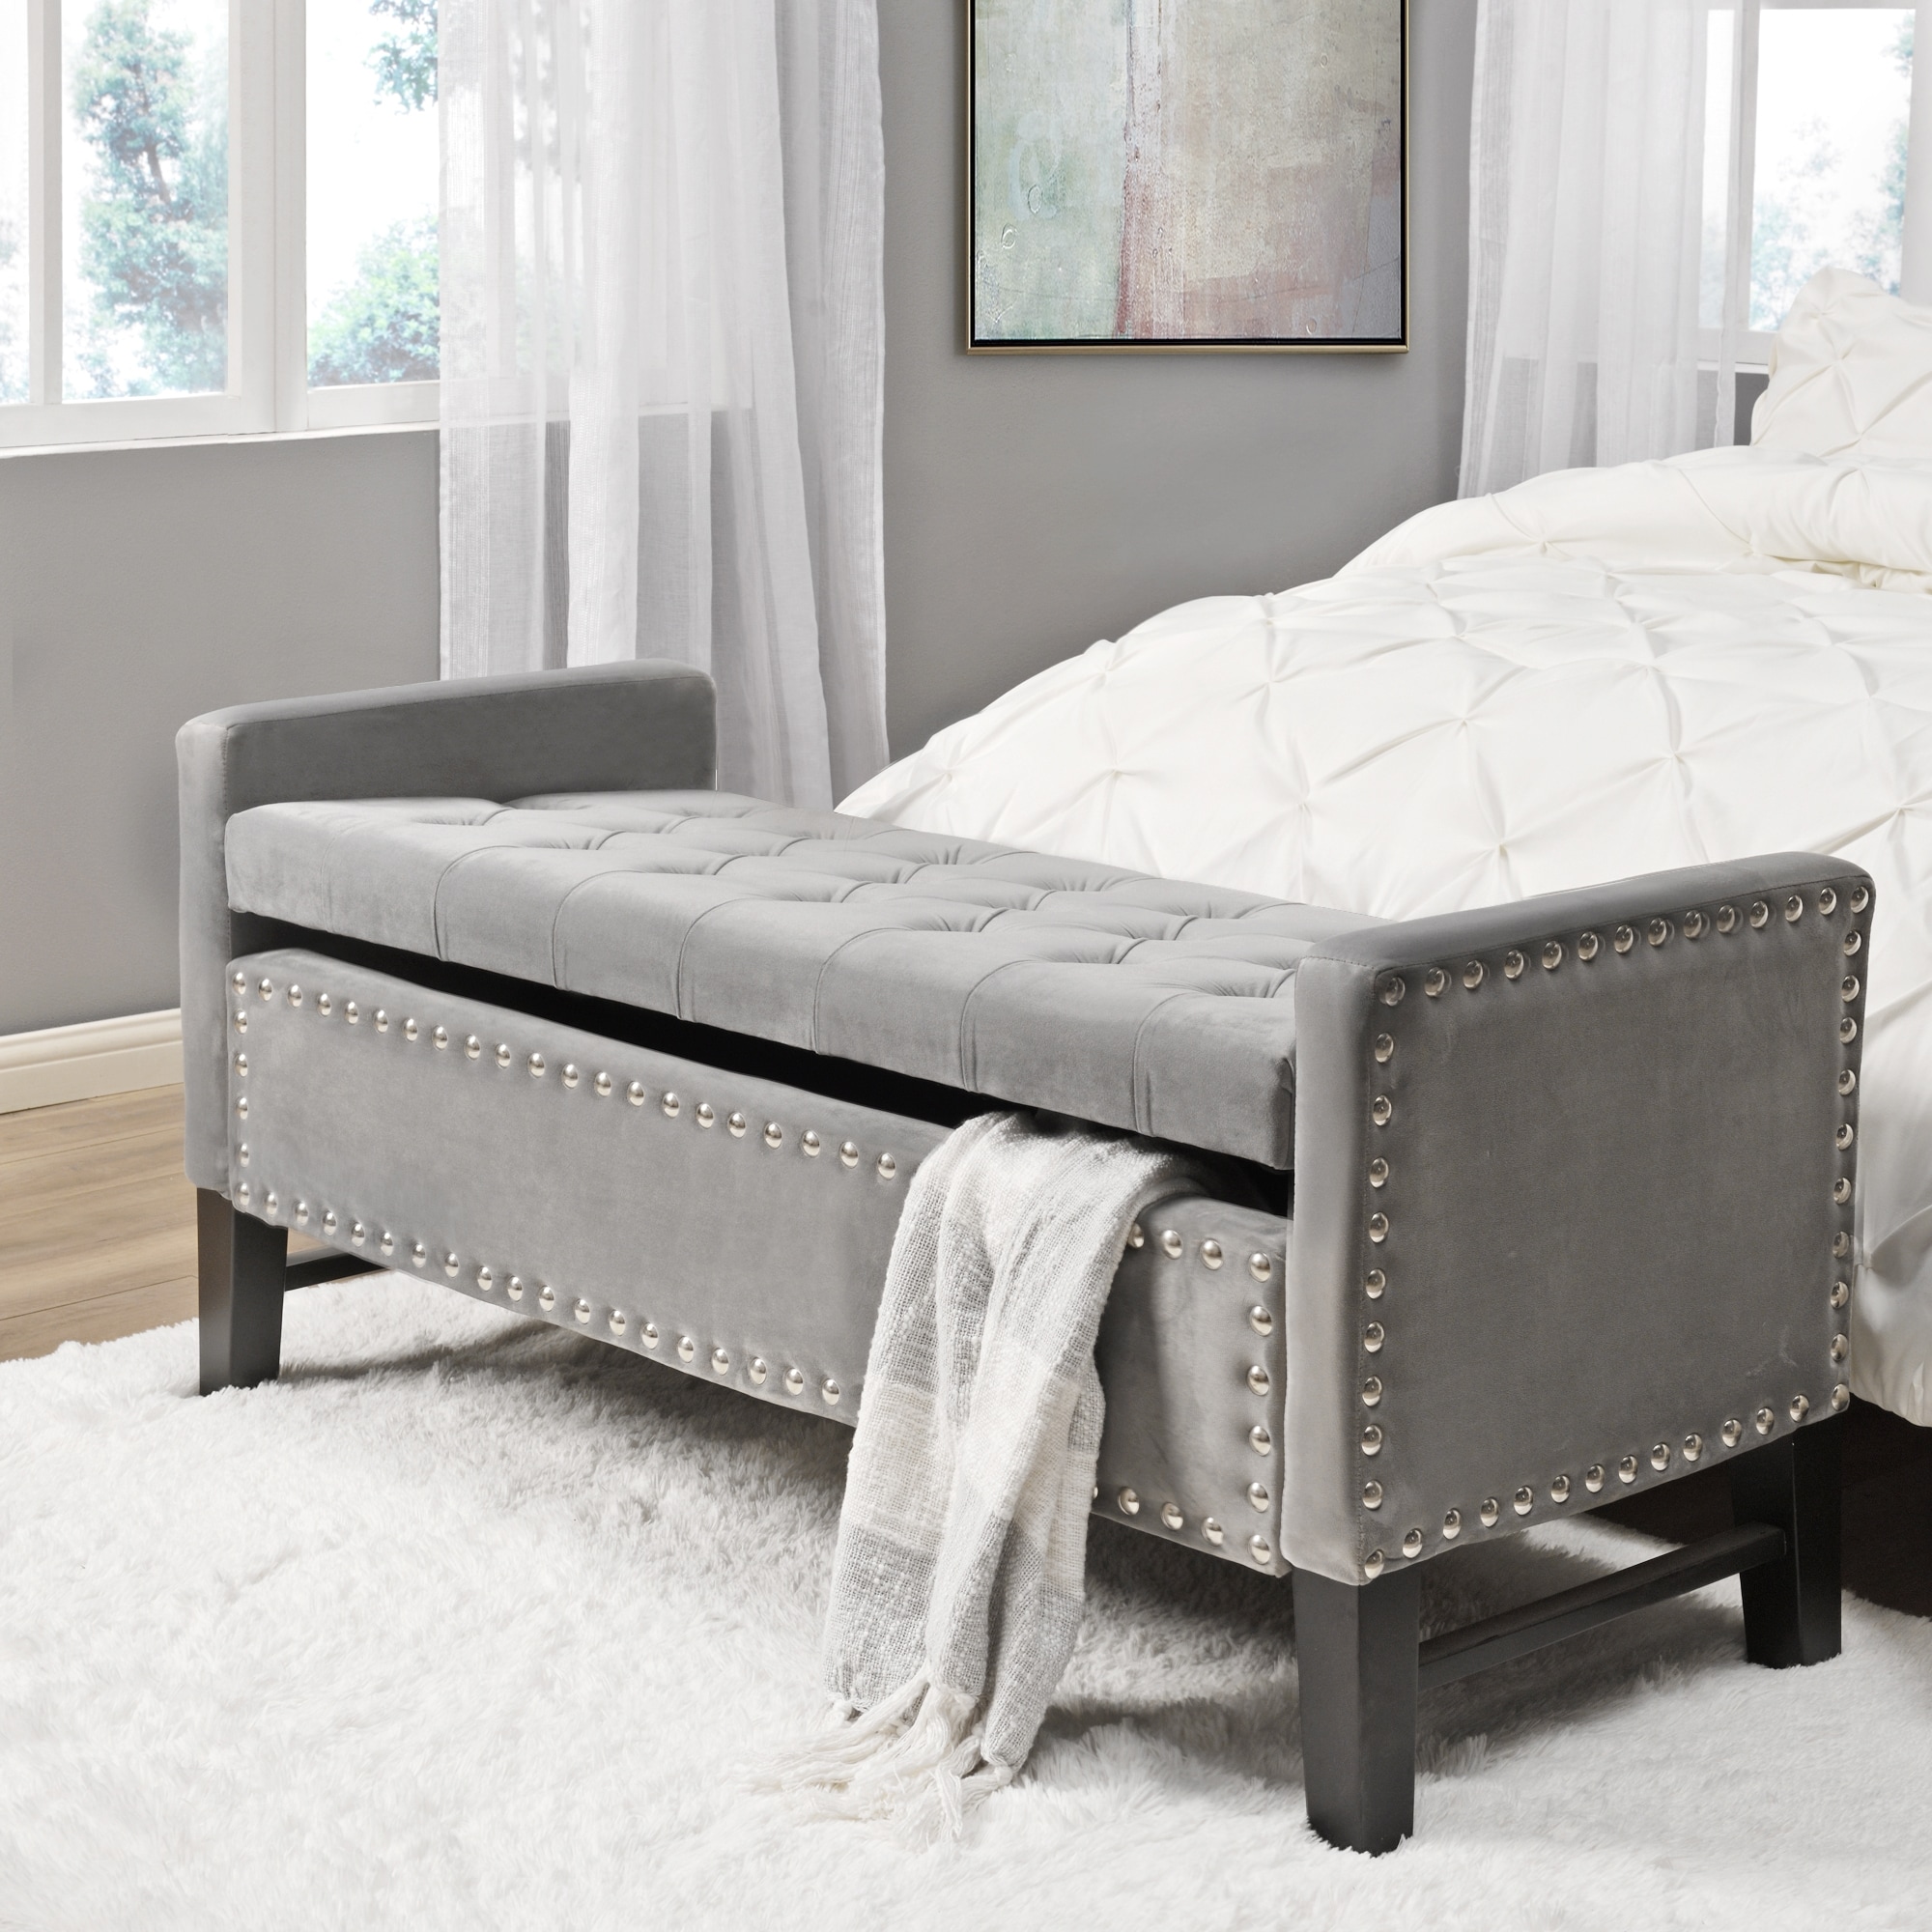 in Light Grey 50-in Storage Modern 22.05-in department with at Home Emmaline Benches x Storage Bench the Inspired